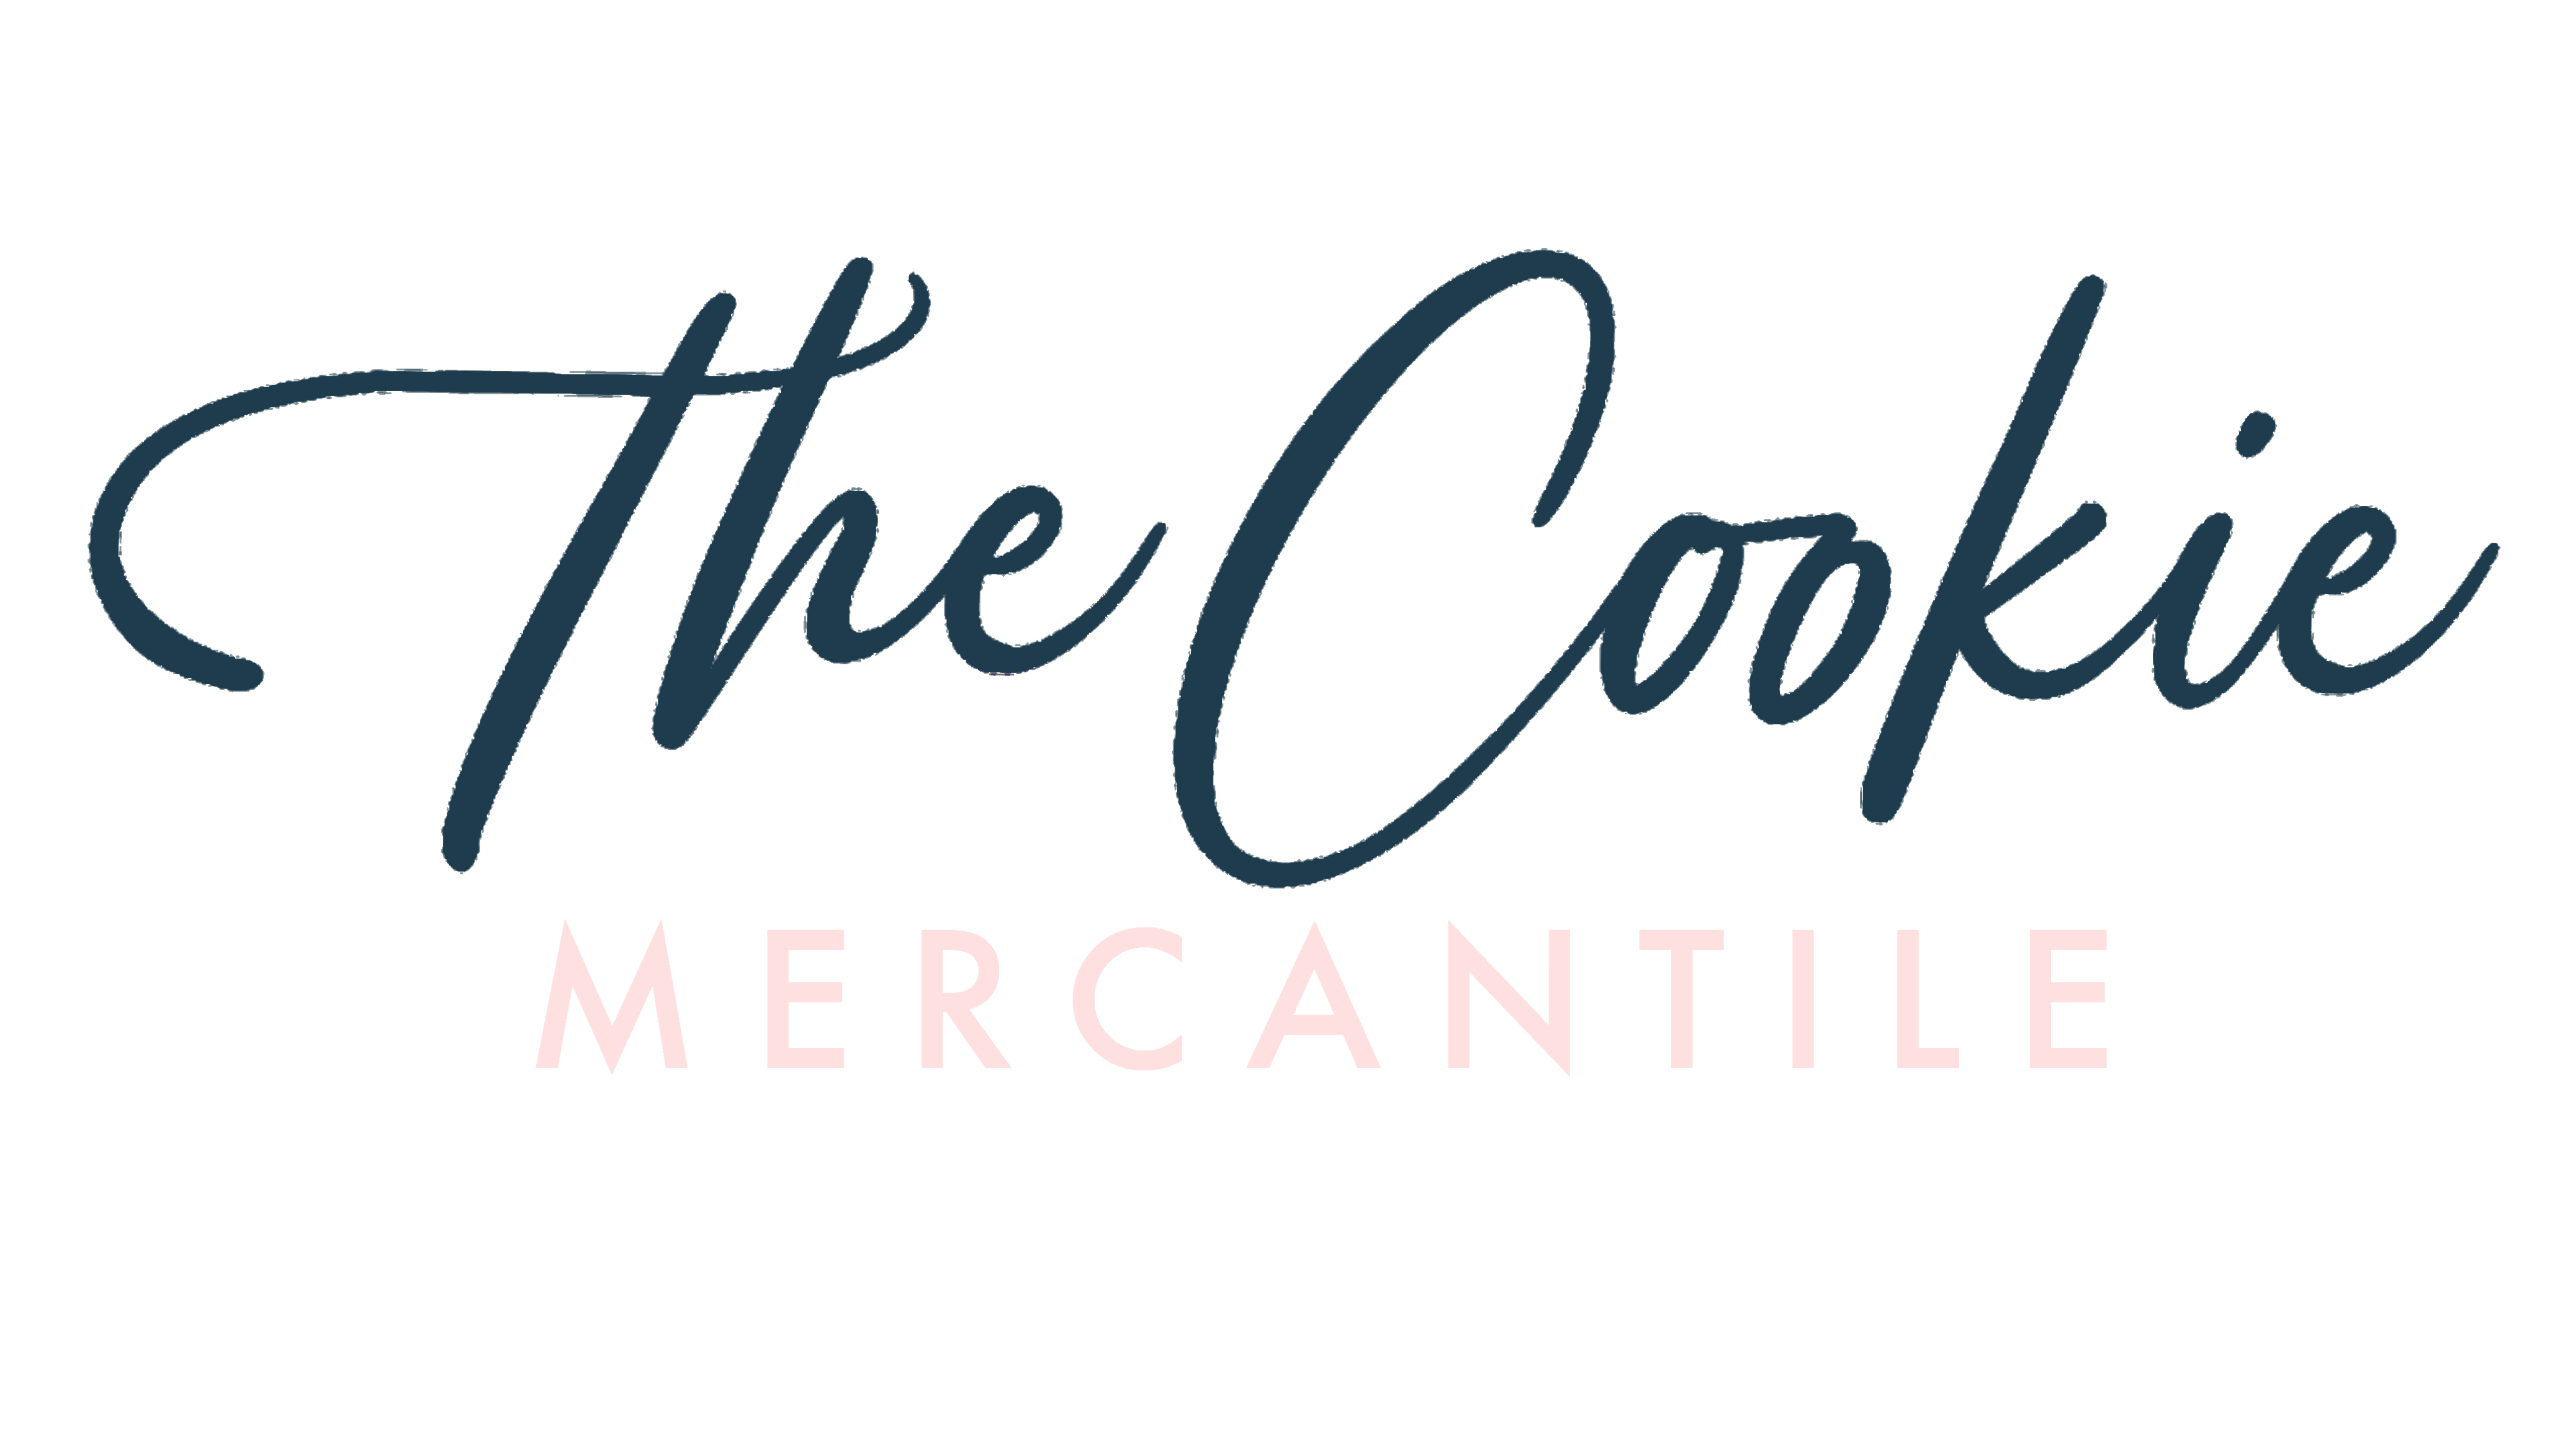 Portion Control Cookie Keeper, Mercantile: Byrd Cookie Company